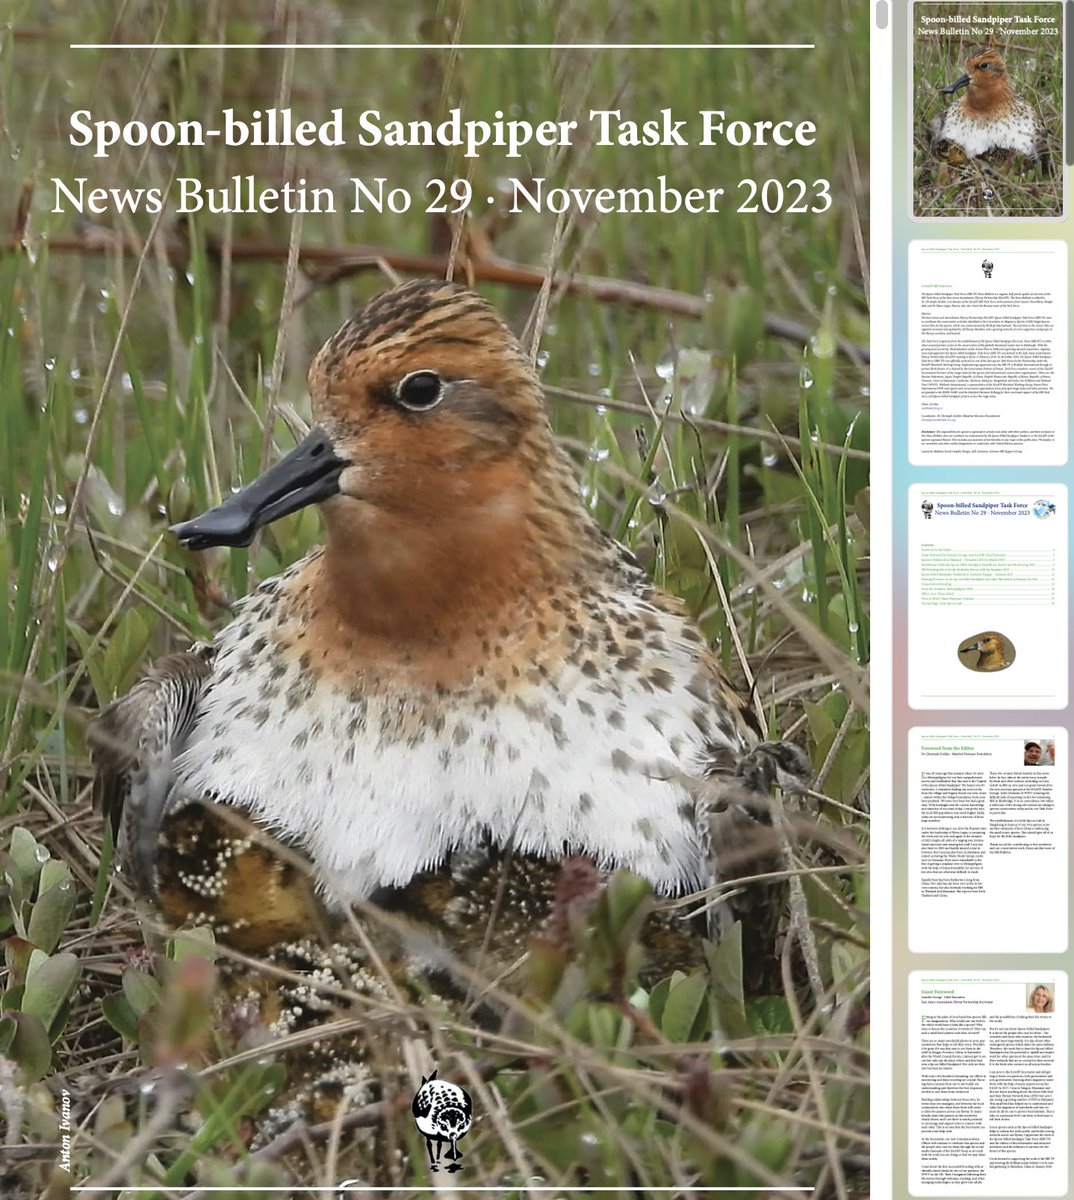 Here is the latest @EAAFP's Spoon-billed Sandpiper Task Force [@SBS_TF] News Bulletin No 29 - tinyurl.com/yu2n7trw! From Thailand's fieldwork to BirdsRussia's Chukotka expedition, explore global Spoonie conservation initiatives. Previous issues: tinyurl.com/ypc3ycks